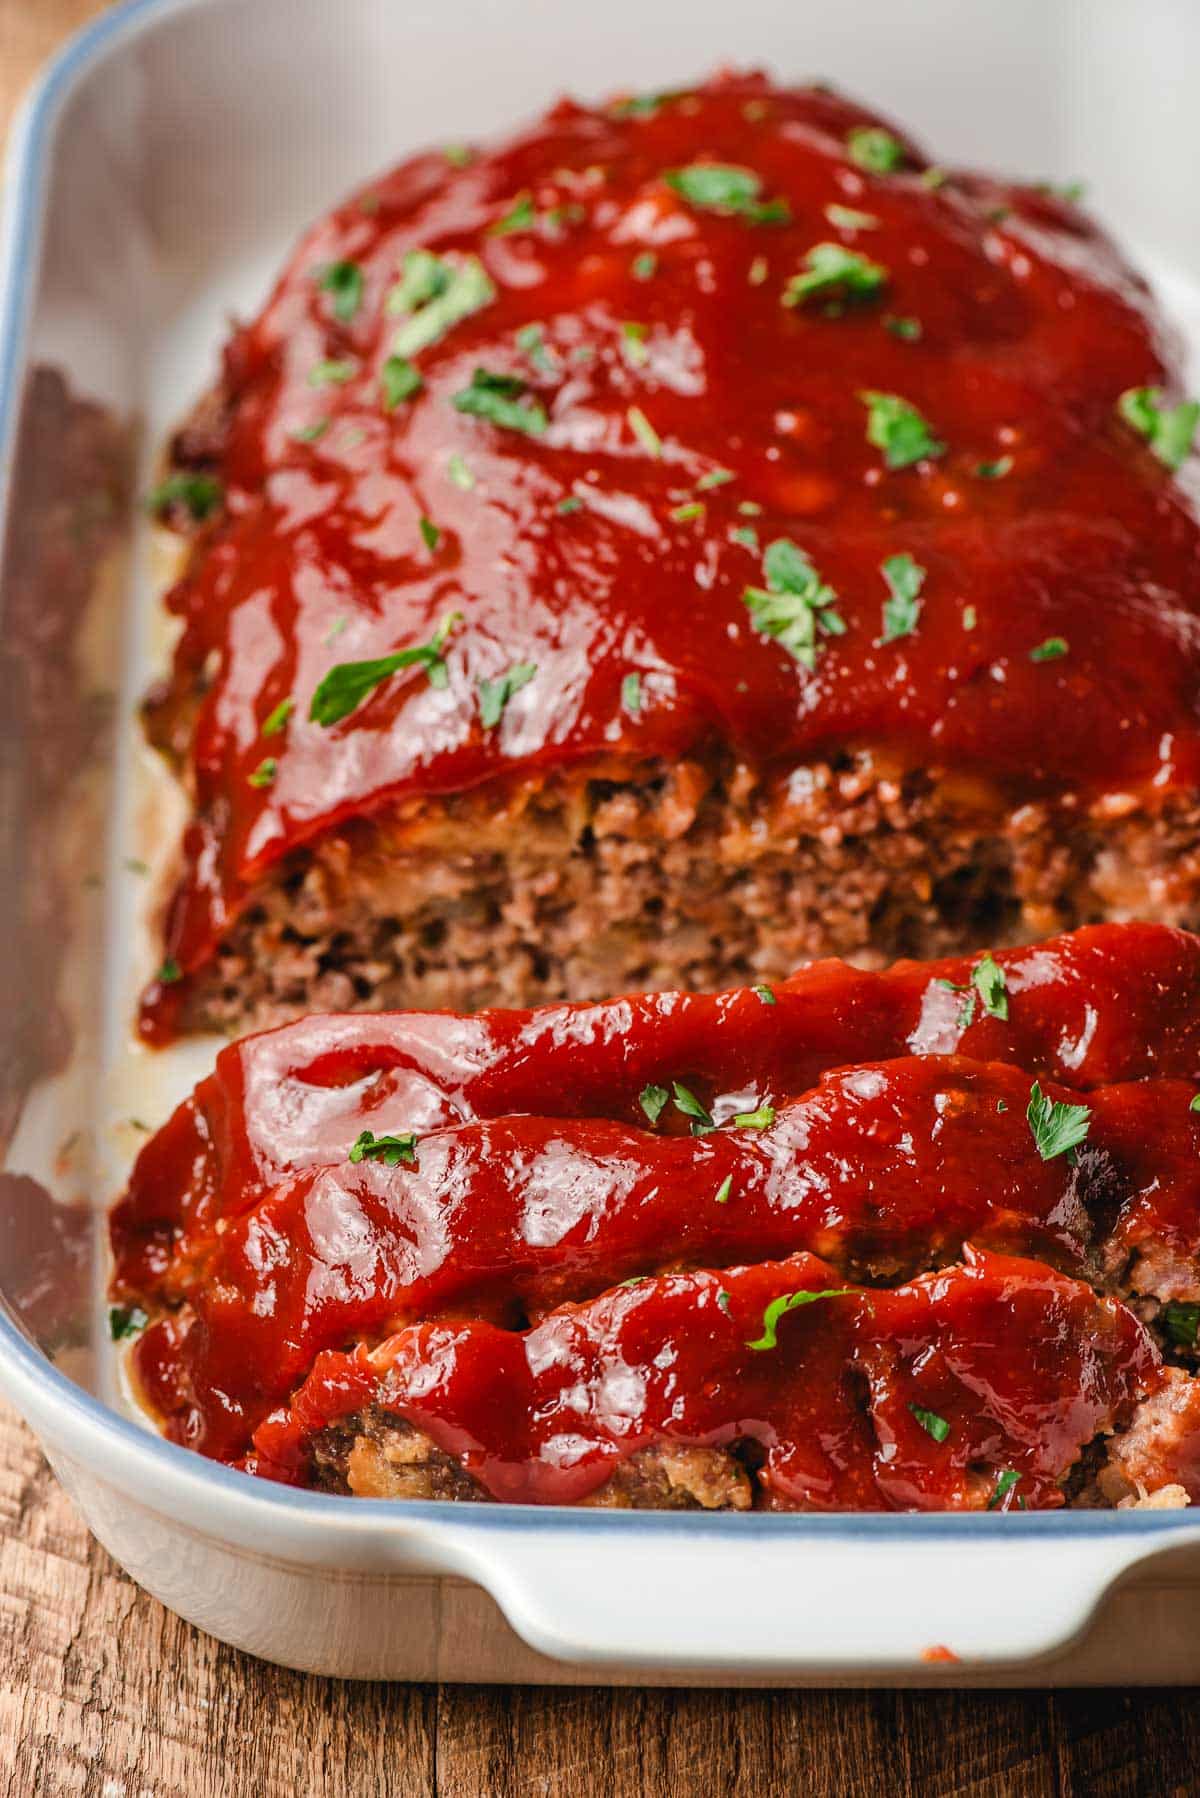 Slices of meatloaf in a white casserole dish.